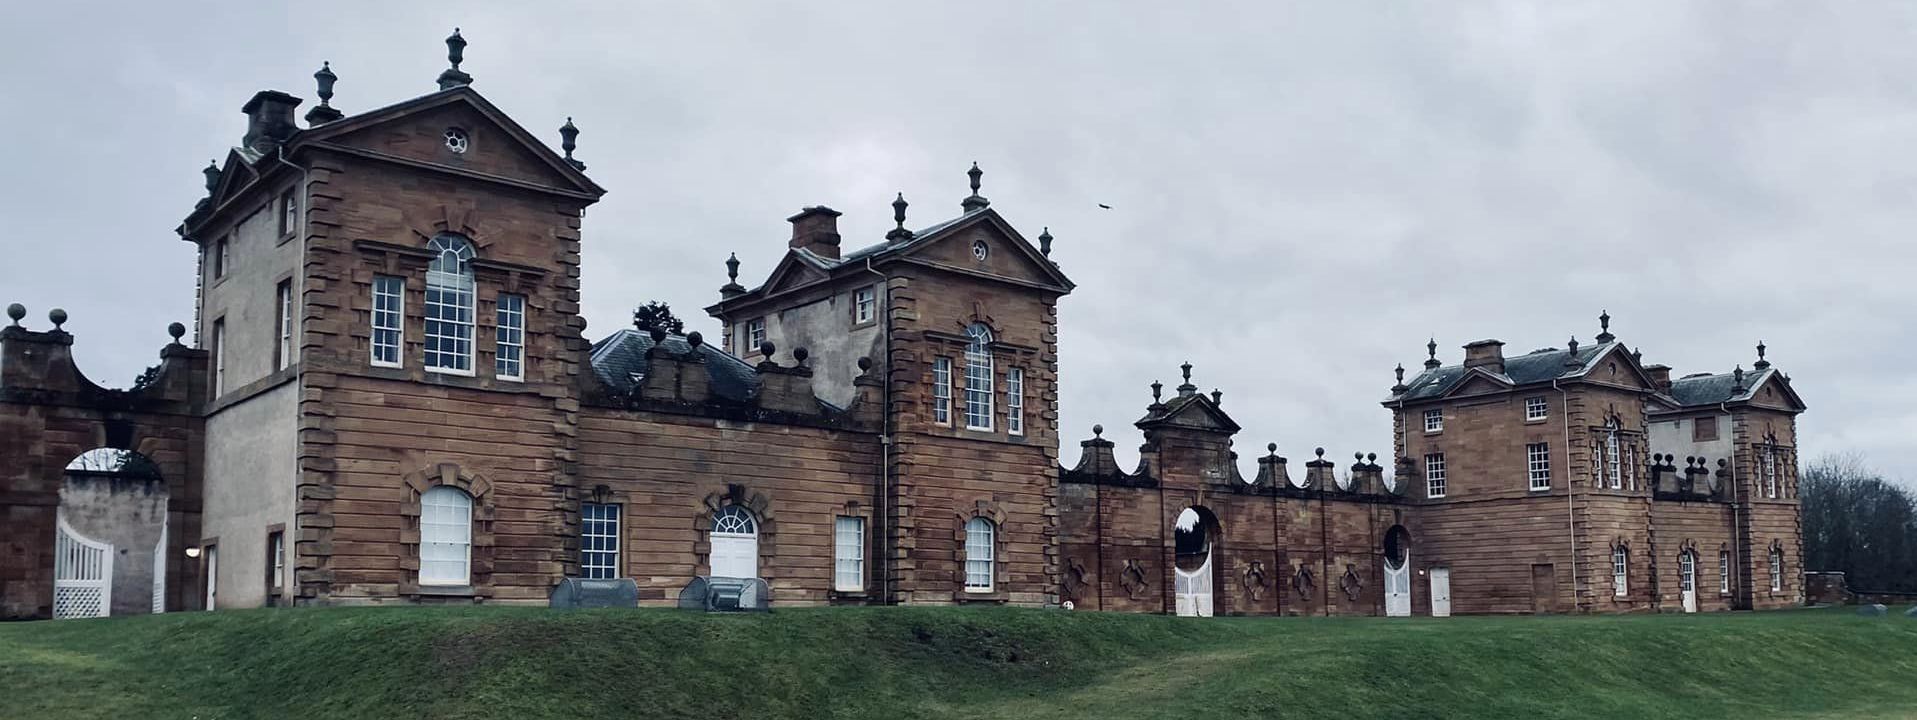 The Hunting Lodge in Chatelherault Country Park